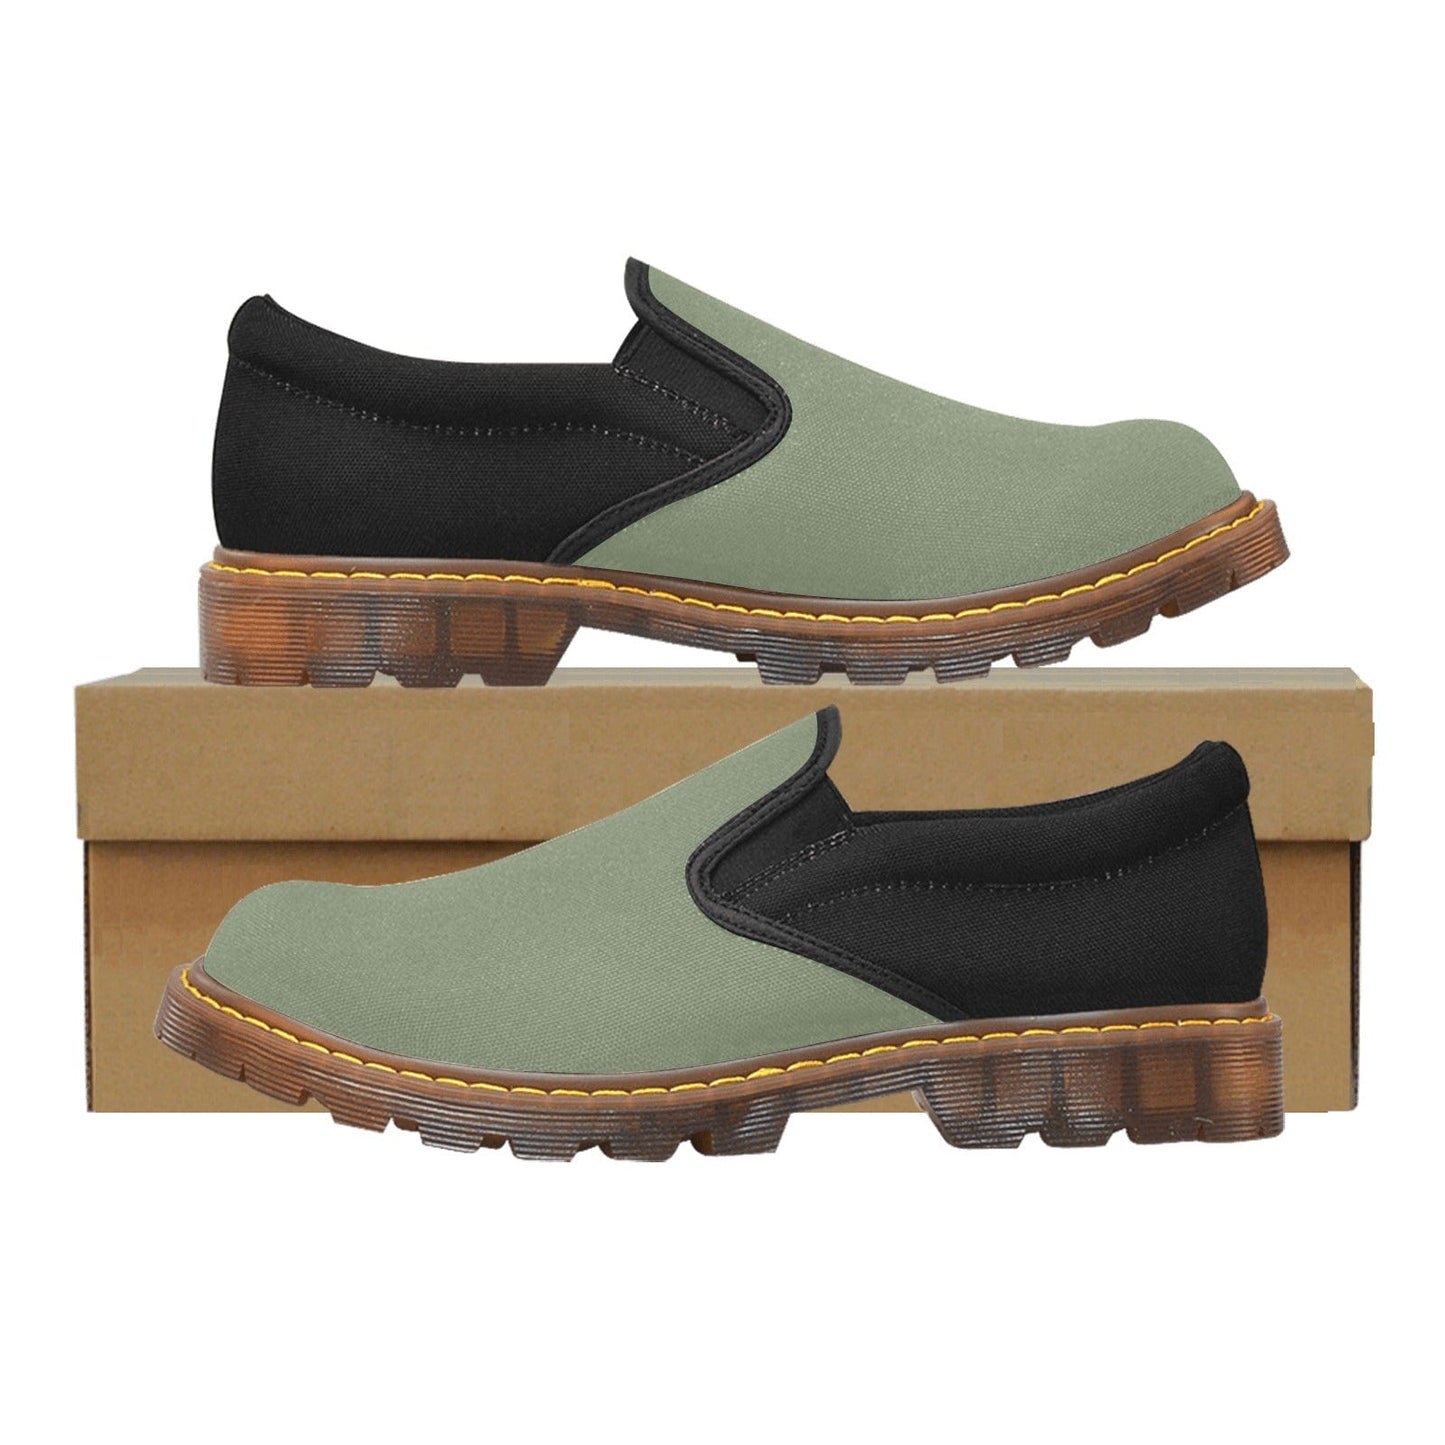 Martin Style Women's Loafers Shoes Khaki Green and Black